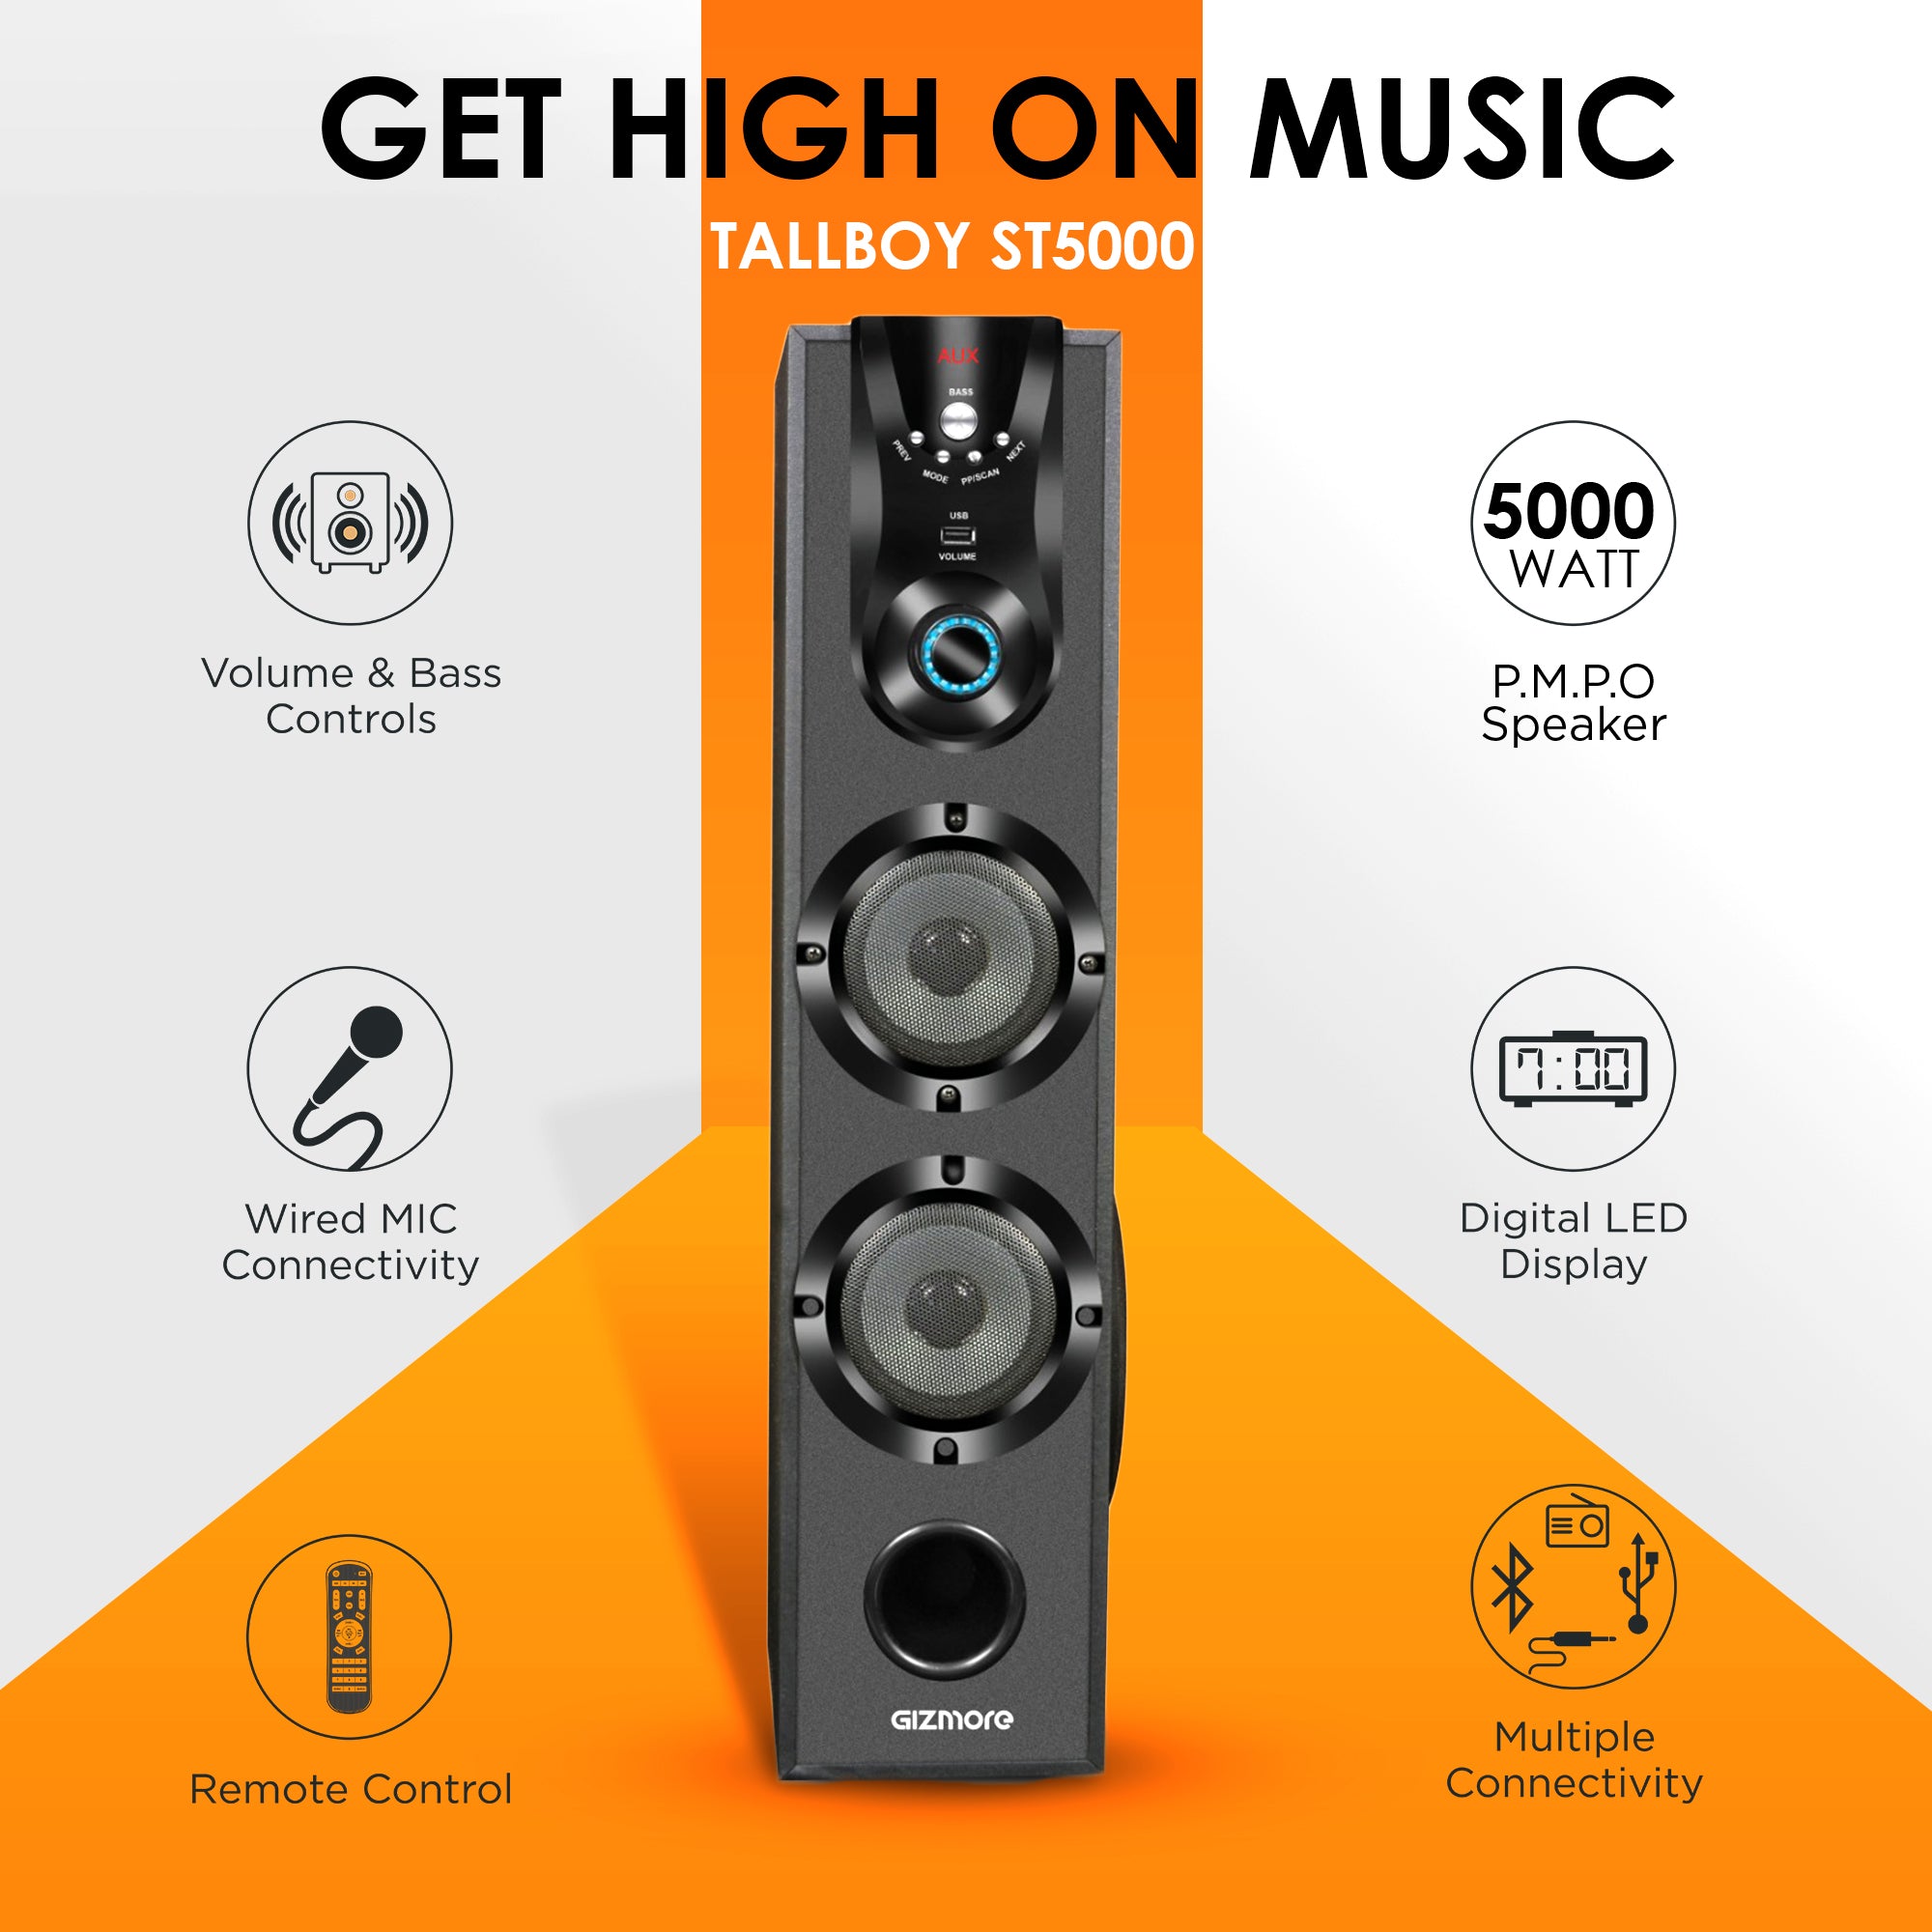 GIZMORE ST5000 50W Bluetooth Tower Speaker | Digital LED Display Wooden Cabinet | Volume & Bass Control | Karaoke and Party Speaker with Multiple Connectivity and Wired MIC